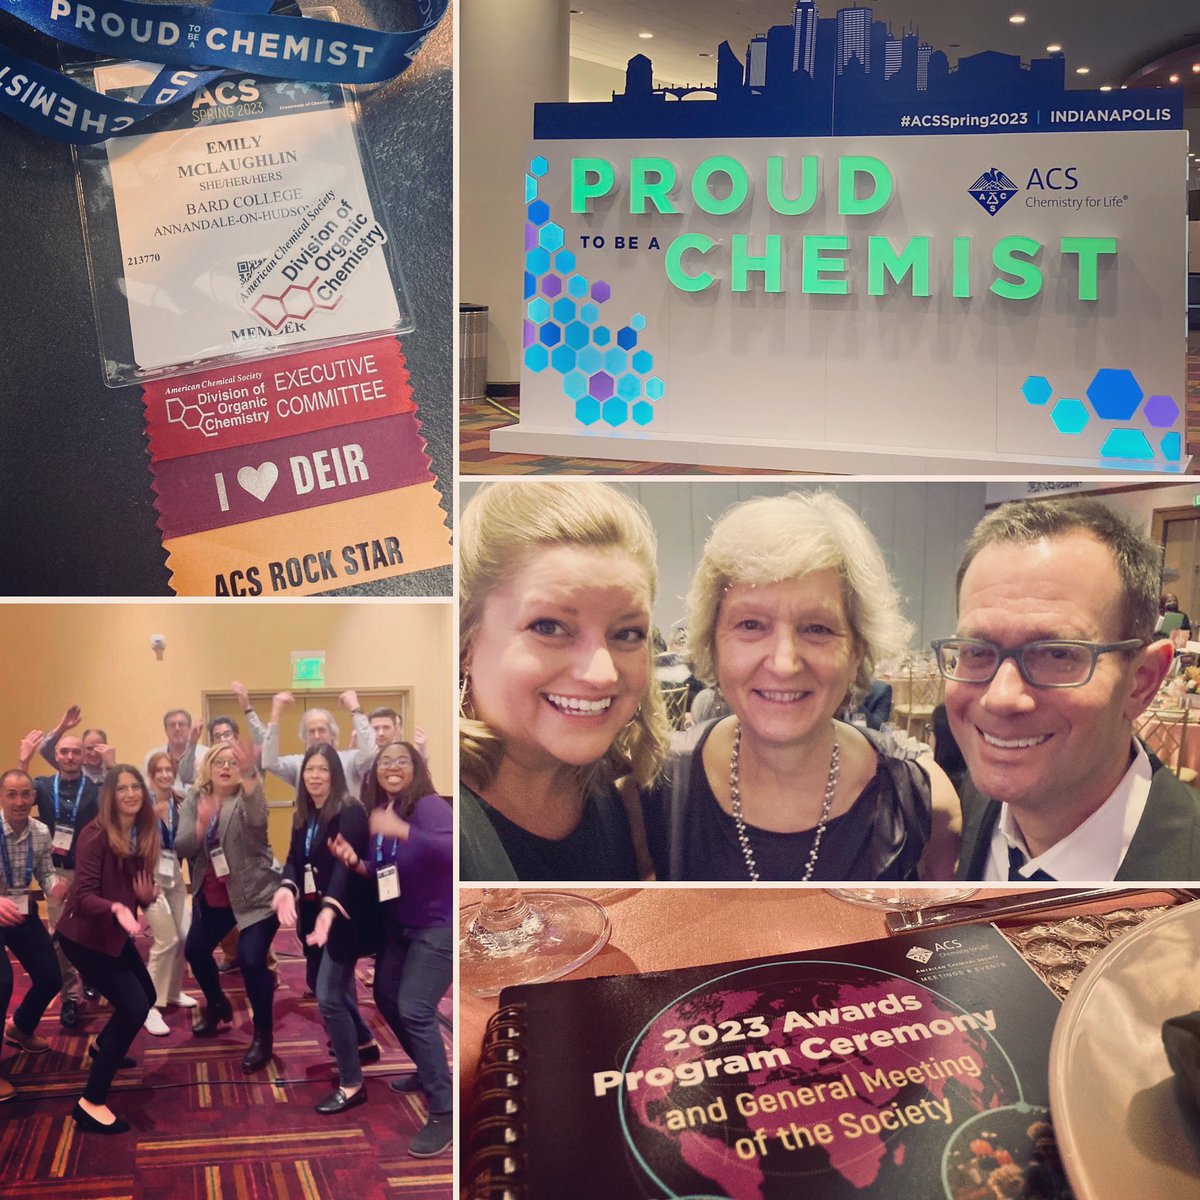 Farewell, Indy! #ACSSpring2023 far exceeded my expectations and it had everything to do with the people. Special thanks to @BagPhos, @asymtmm, @ACSorganic, the presenters, and the presider. We had networking, dancing, celebrations… oh yeah, and tons of great science!